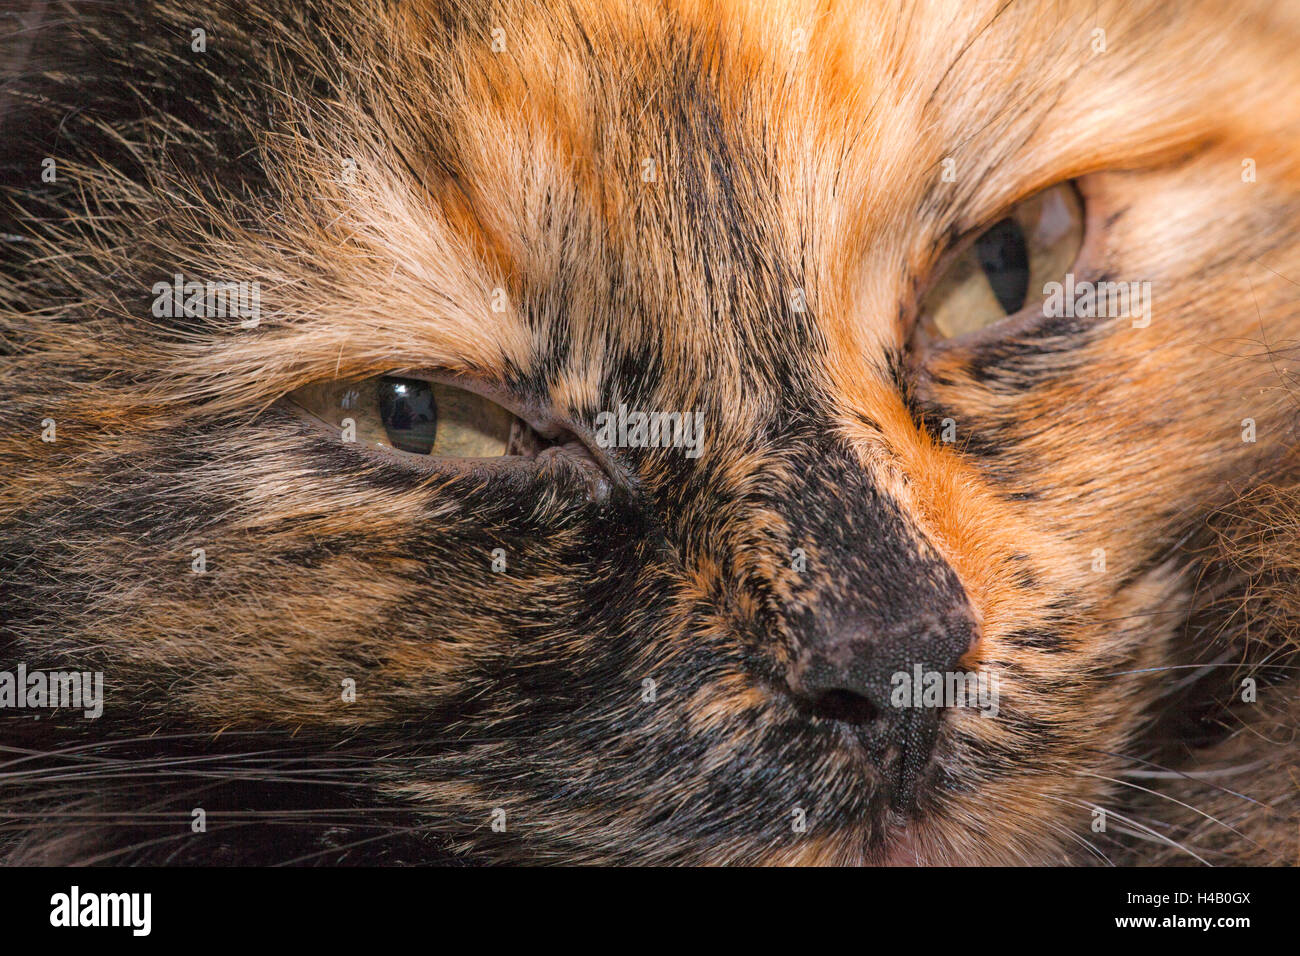 Portrait of a cat with golden brown fur Stock Photo